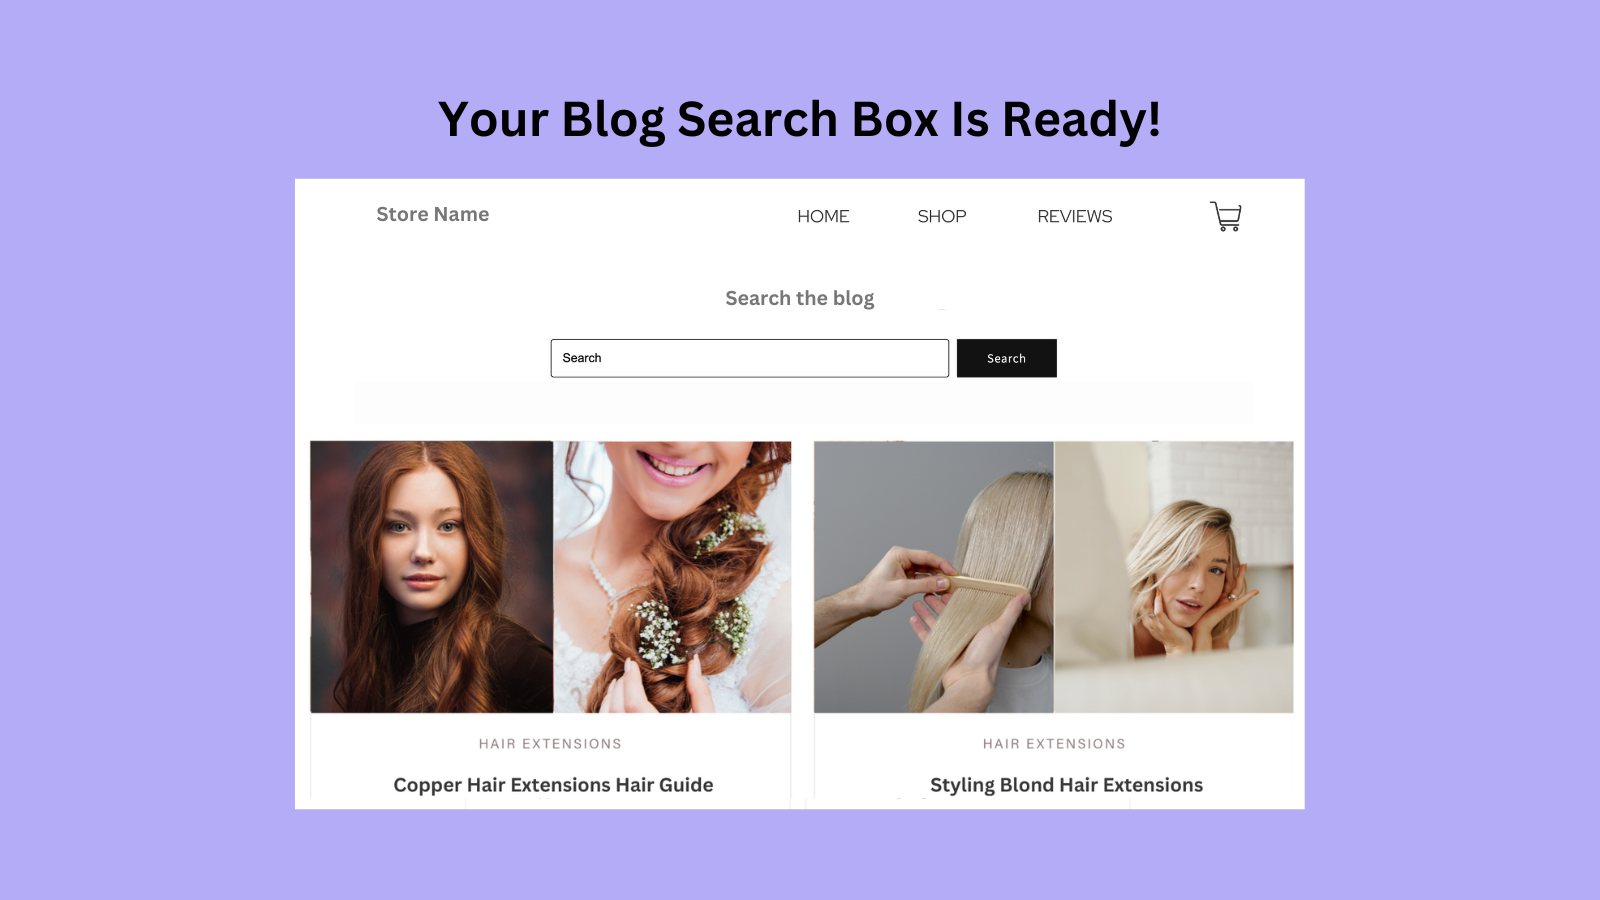 Your blog search is ready